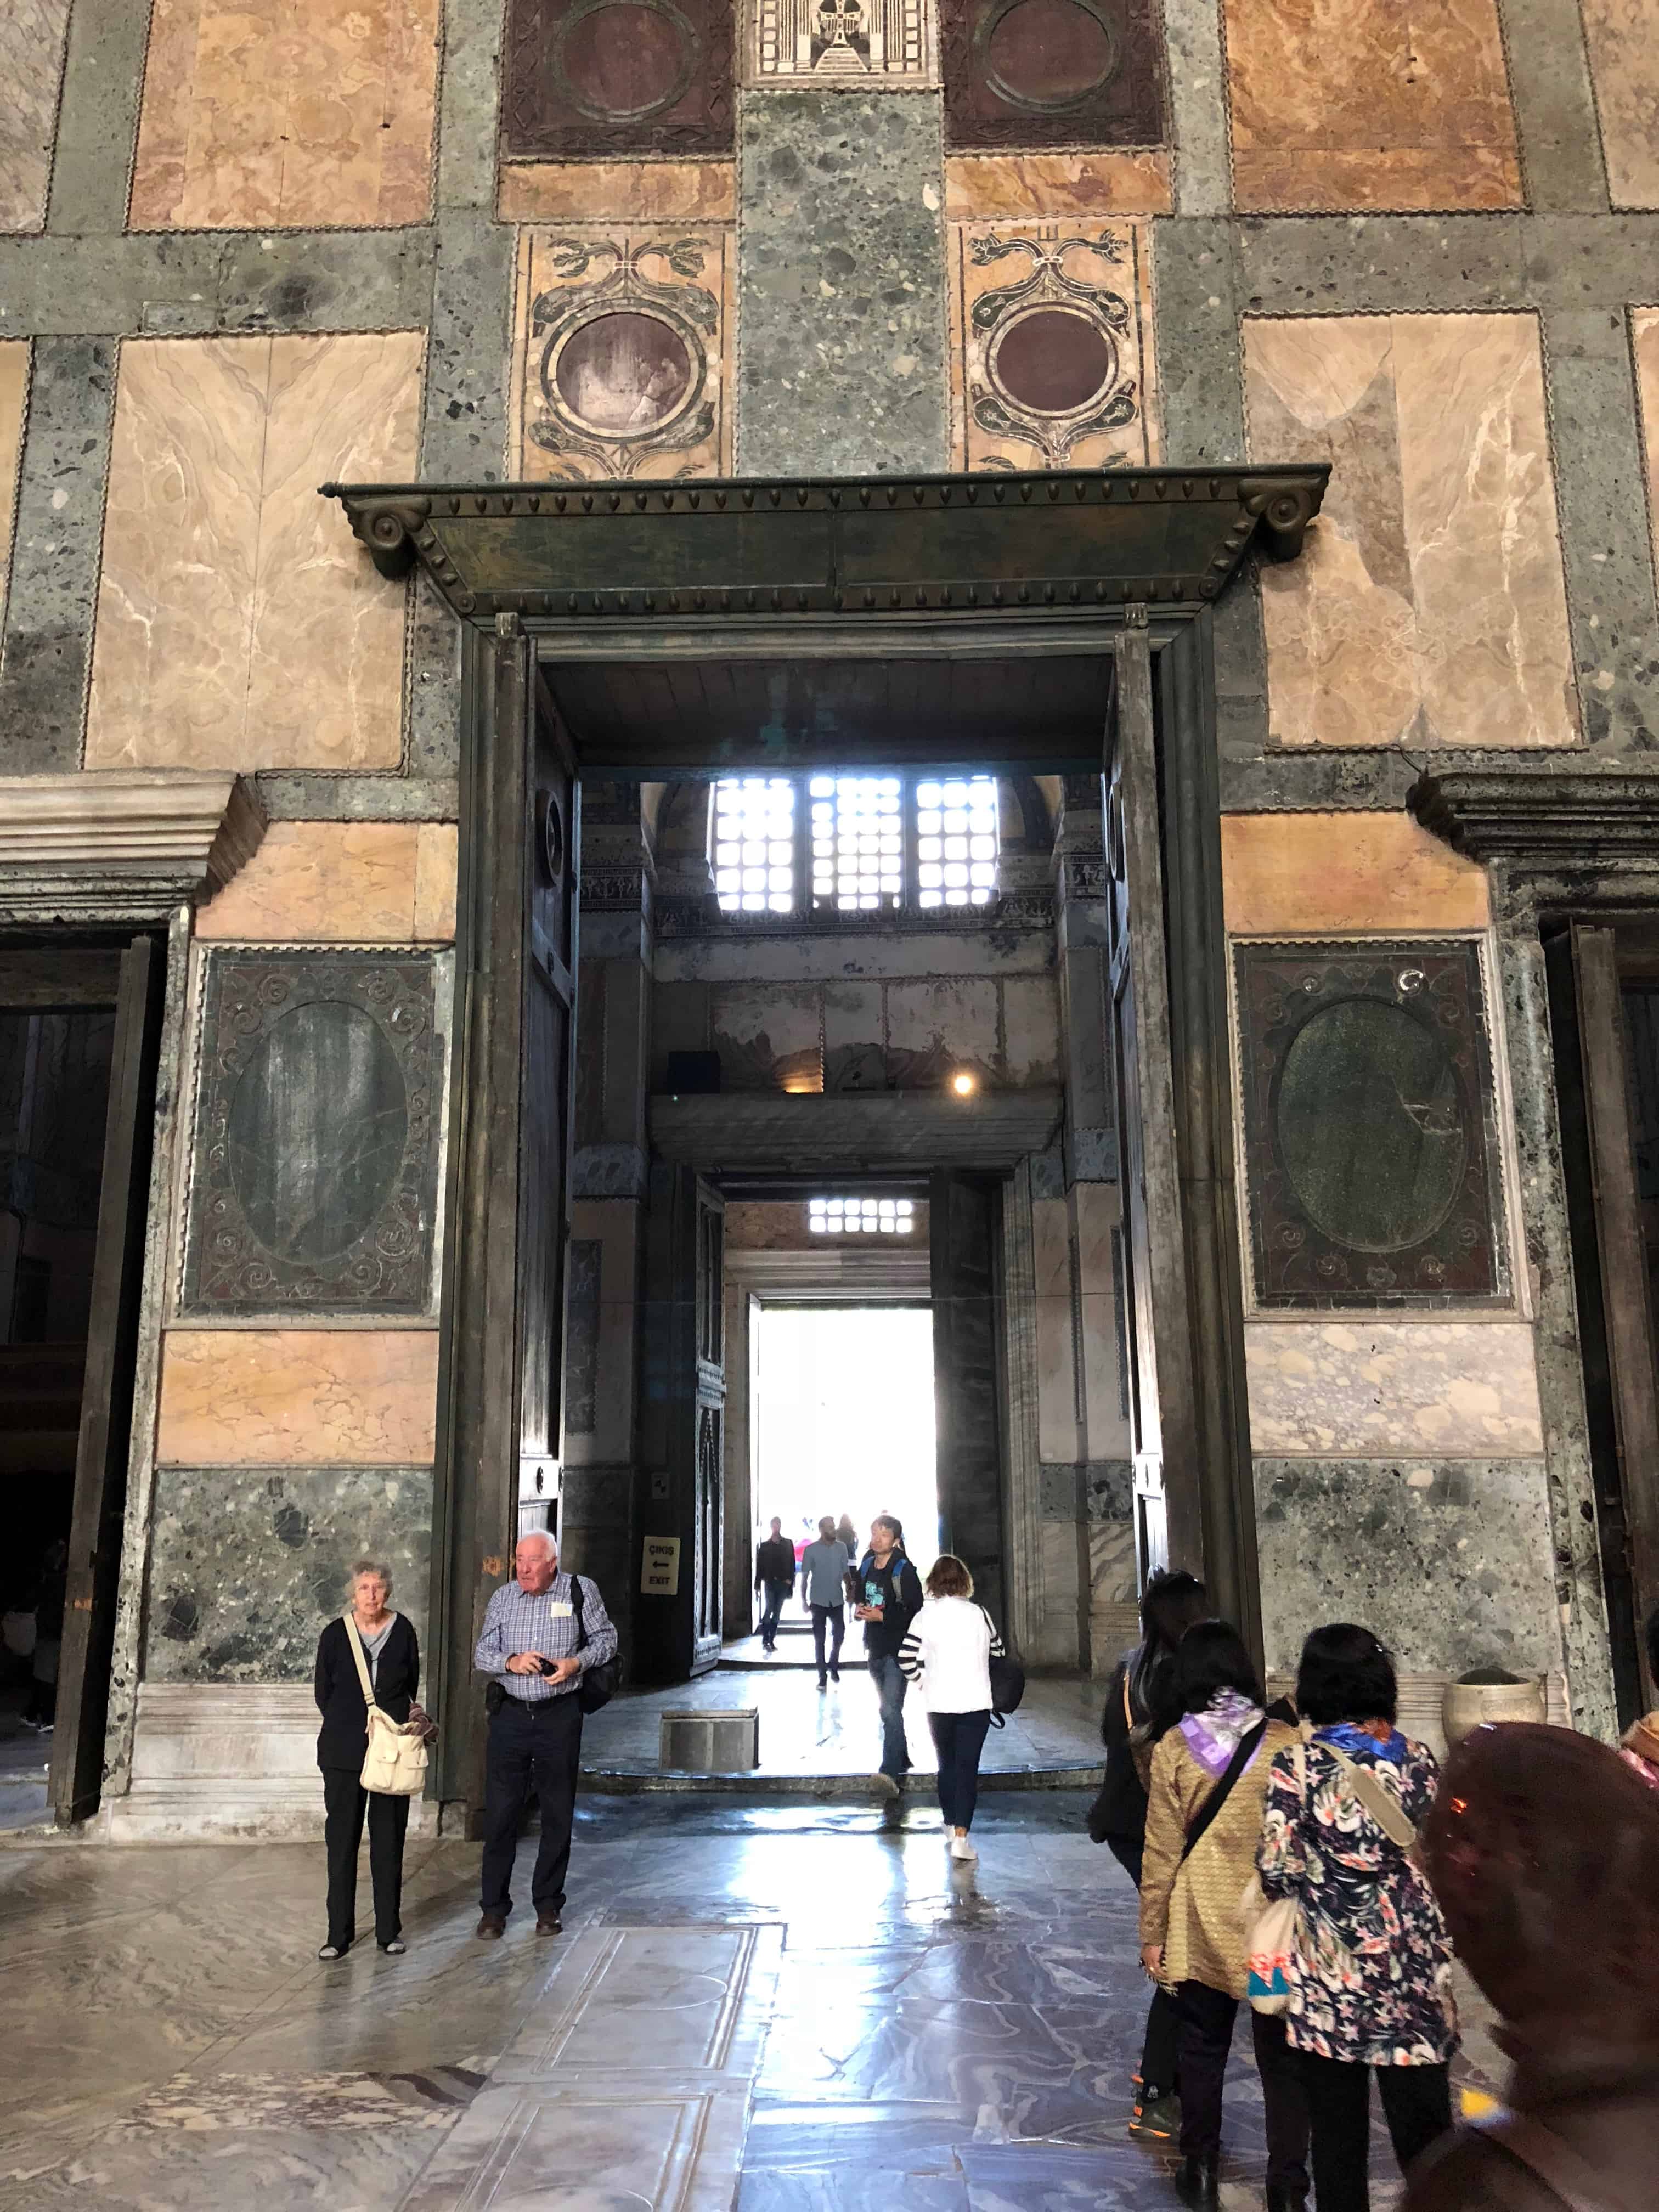 Imperial Gate from the nave at Hagia Sophia in Istanbul, Turkey